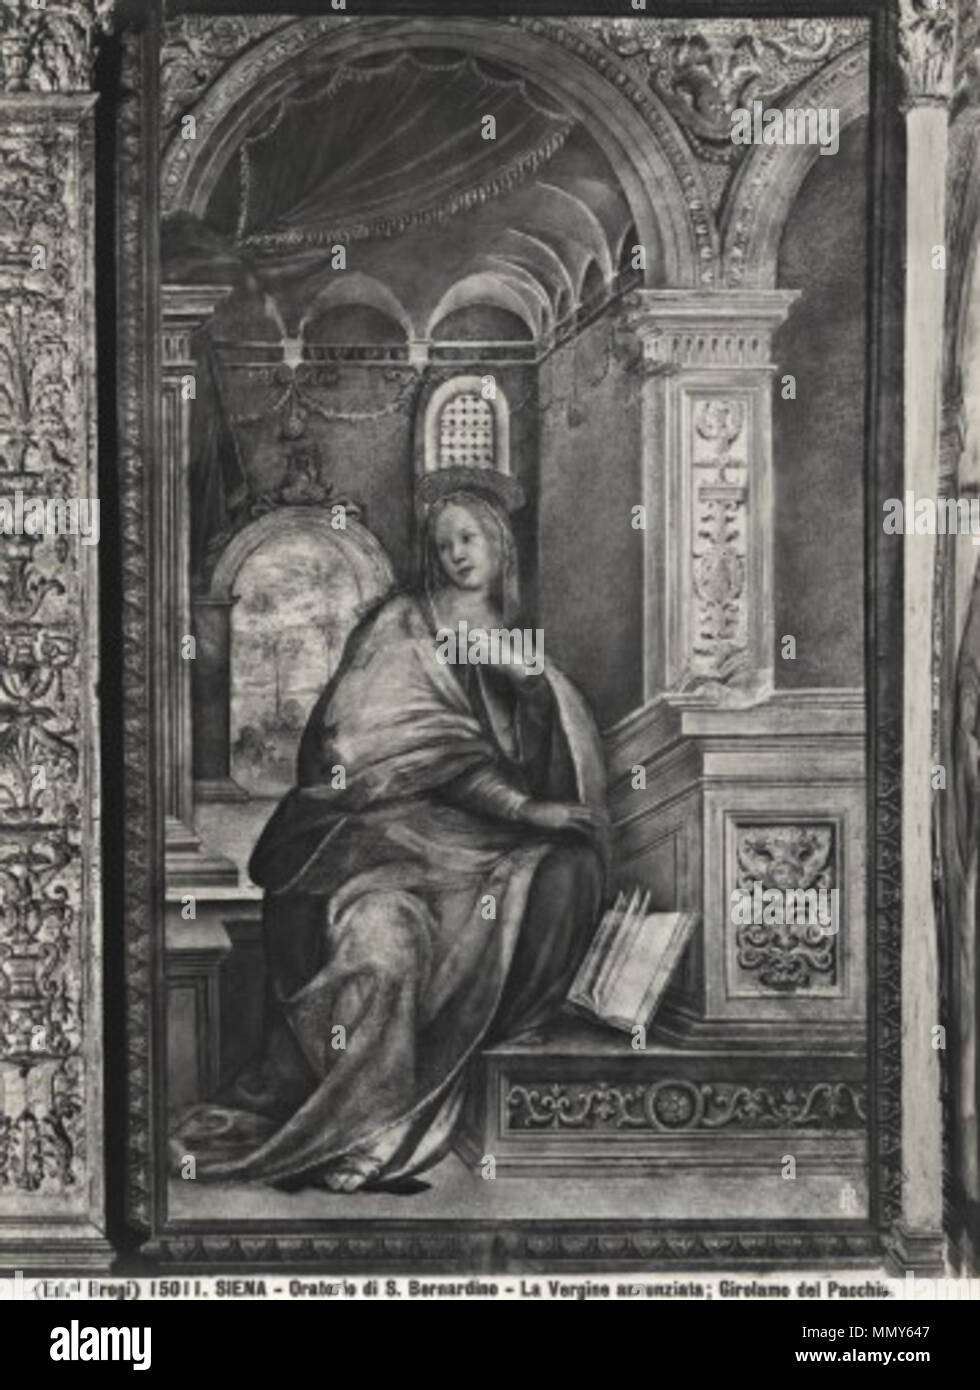 . The Annunciation  . between 1510s and 1530s.   Girolamo del Pacchia  (1477–1533)    Alternative names Girolamo Del Pacchia; Gerolamo della Pacchia; del Pacchia Girolamo; Girolamo della Pacchia; Pseudo Pacchia; Girolamo del Pacchia Pacchia; Pacchia  Description painter  Date of birth/death 5 January 1477 after 1533  Location of birth/death Siena Siena  Work period High Renaissance  Work location Siena  Authority control  : Q525123 VIAF:?35397366 ISNI:?0000 0000 8218 6881 ULAN:?500015992 LCCN:?nr91029384 WGA:?GIROLAMO del Pacchia WorldCat Girolamo del Pacchia , annunciata Stock Photo